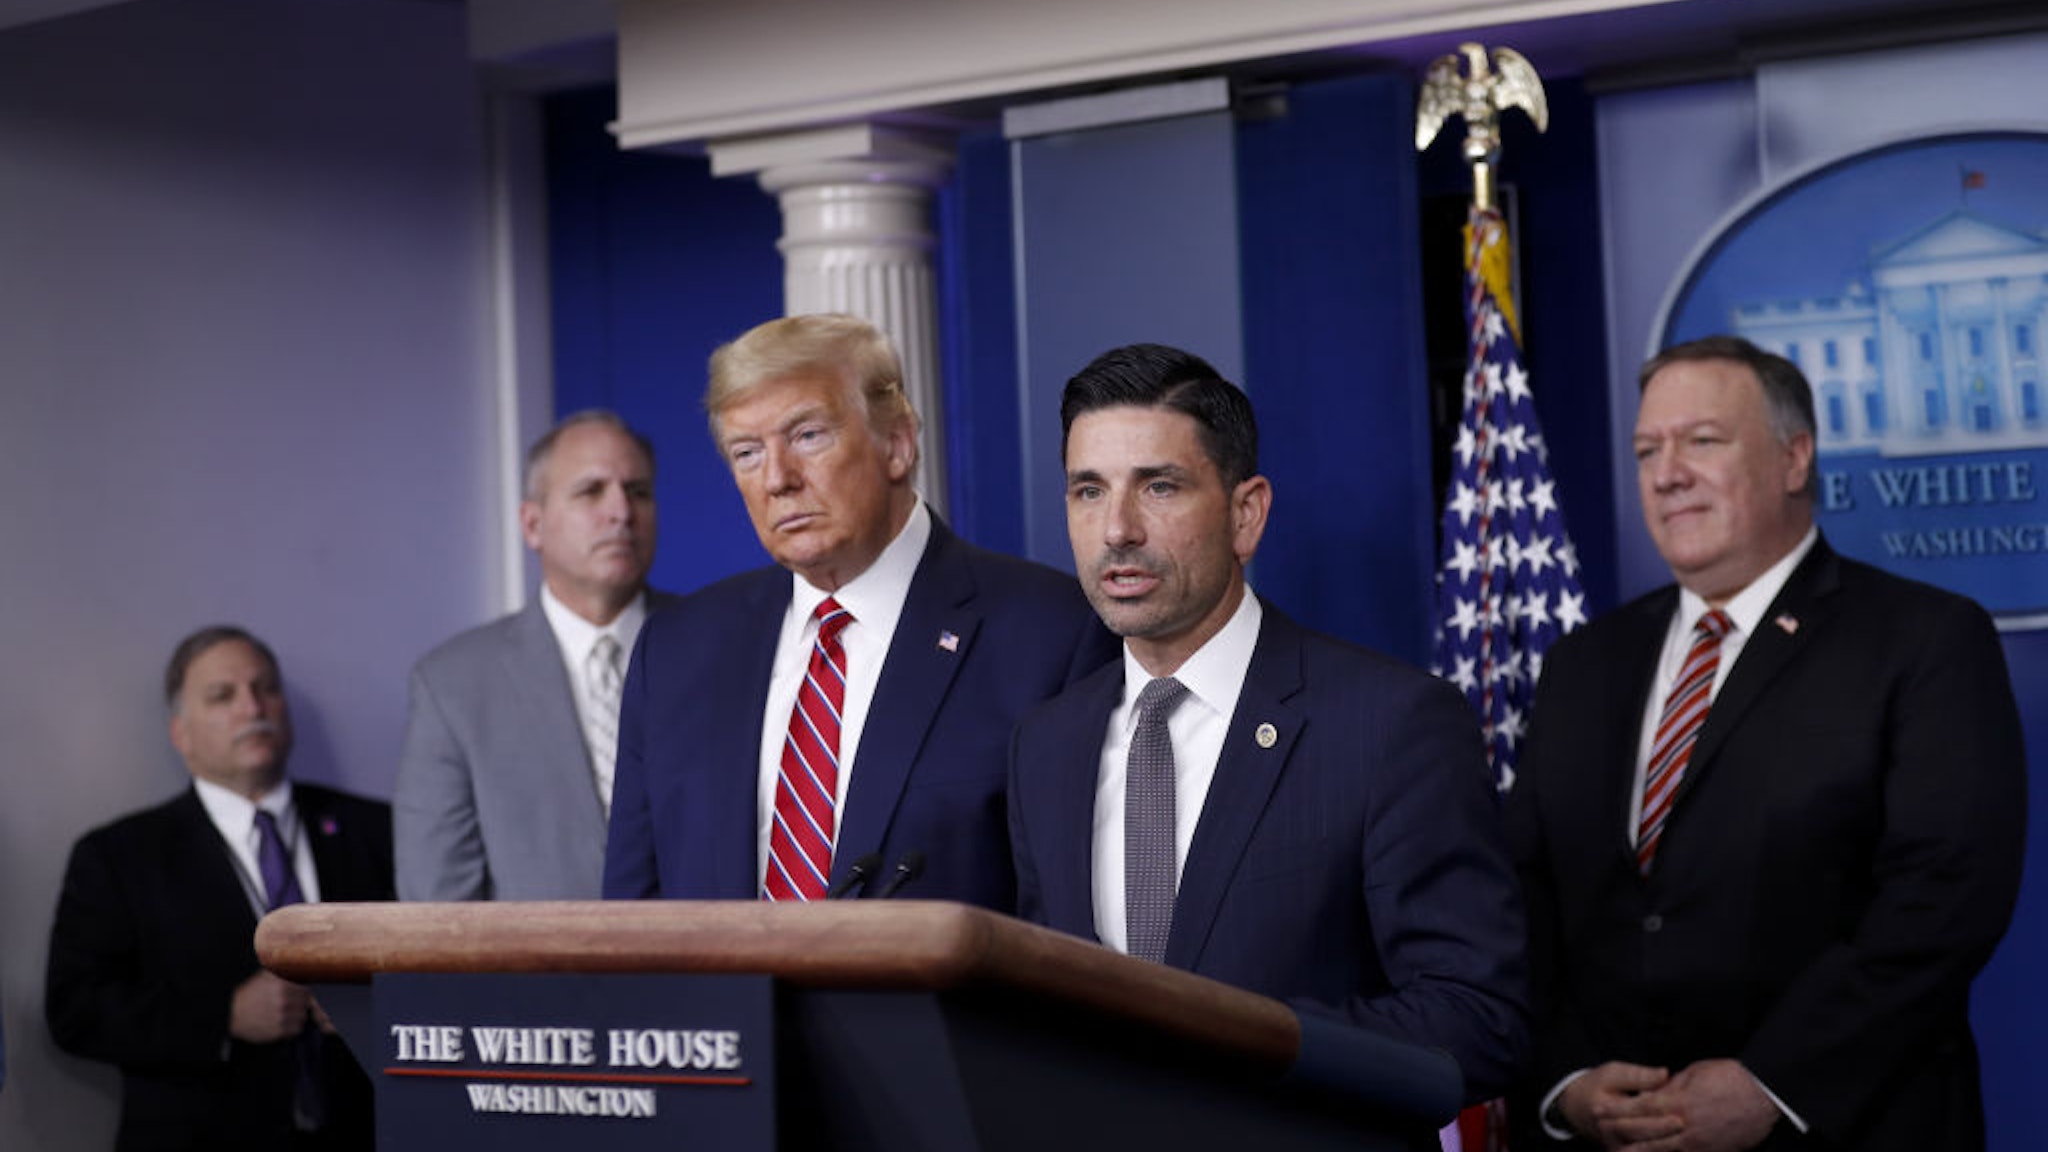 Chad Wolf, acting secretary of the Department of Homeland Security (DHS), center, speaks as U.S. President Donald Trump, third left, listens during a Coronavirus Task Force news conference in the briefing room of the White House in Washington, D.C., U.S., on Friday, March 20, 2020.